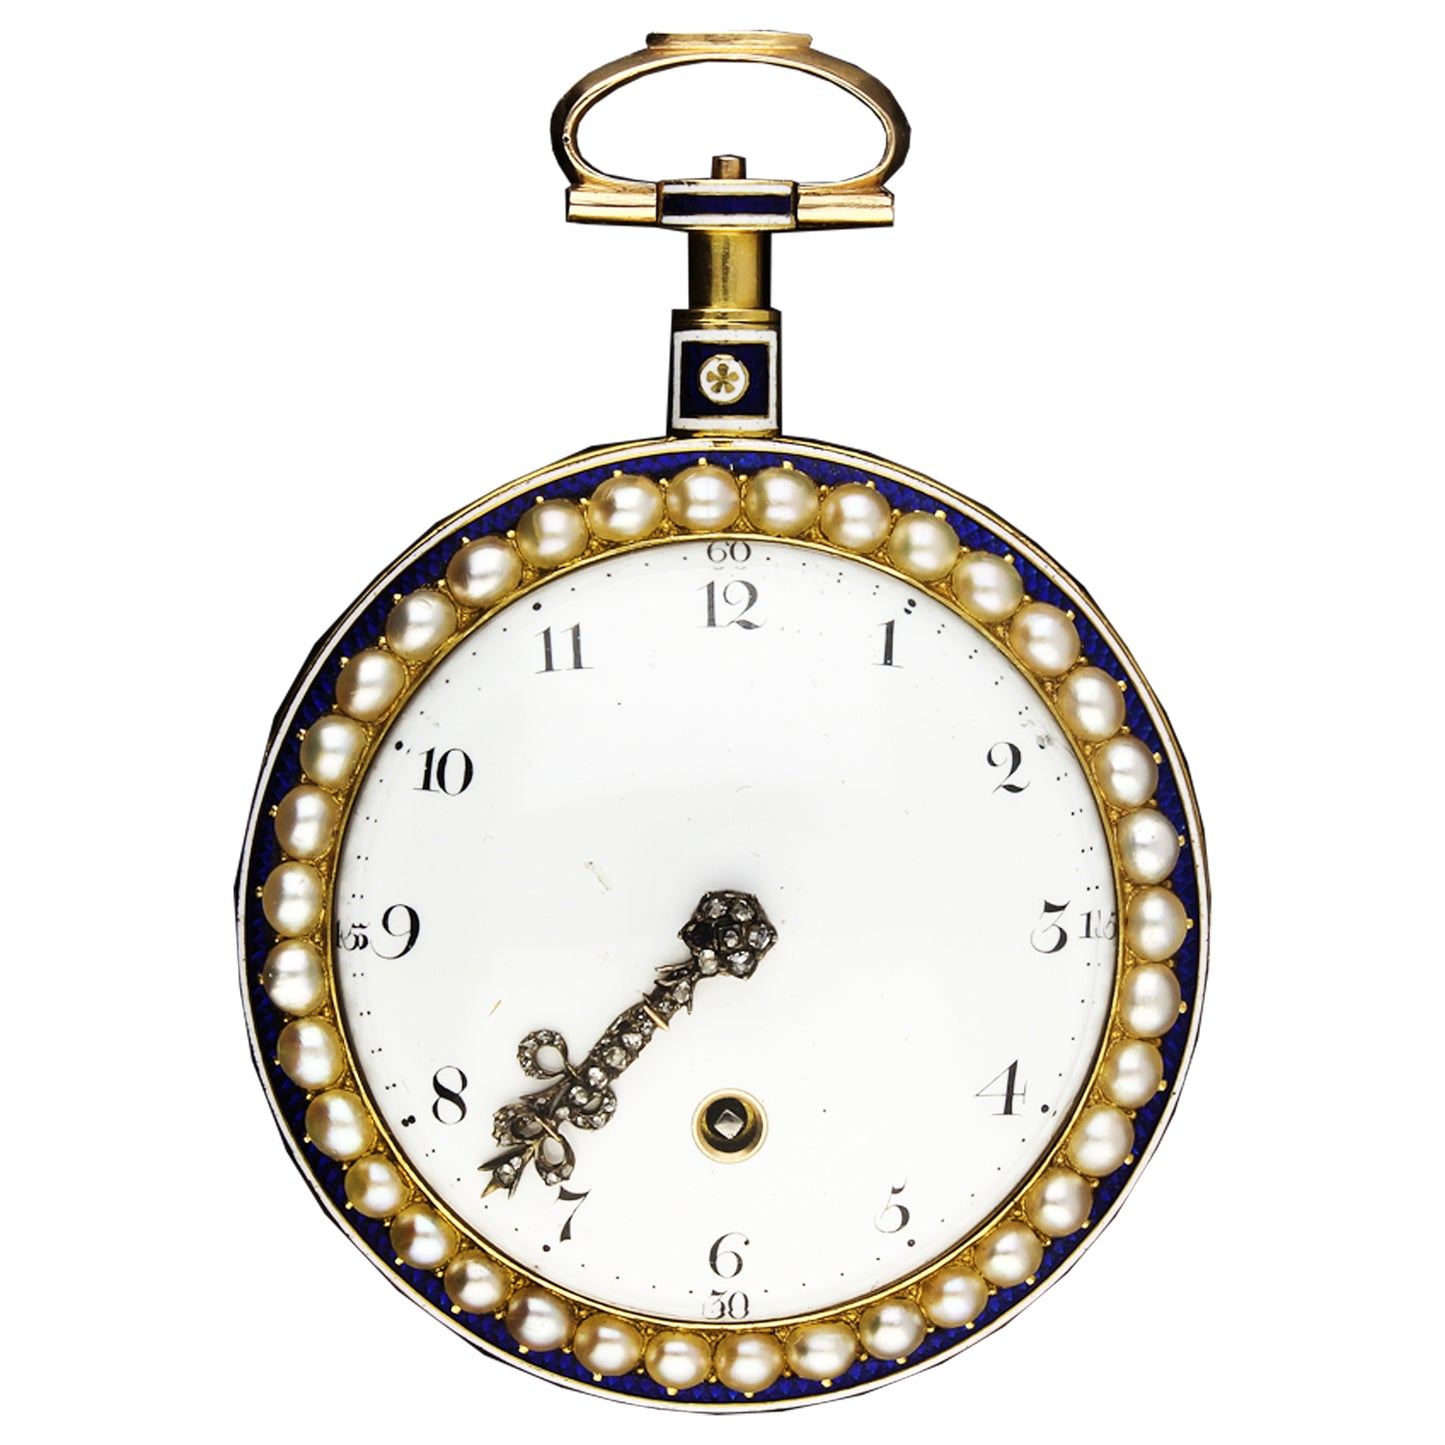 18ct yellow gold, enamel, diamond and pearl set open face pocket watch. Circa 1780